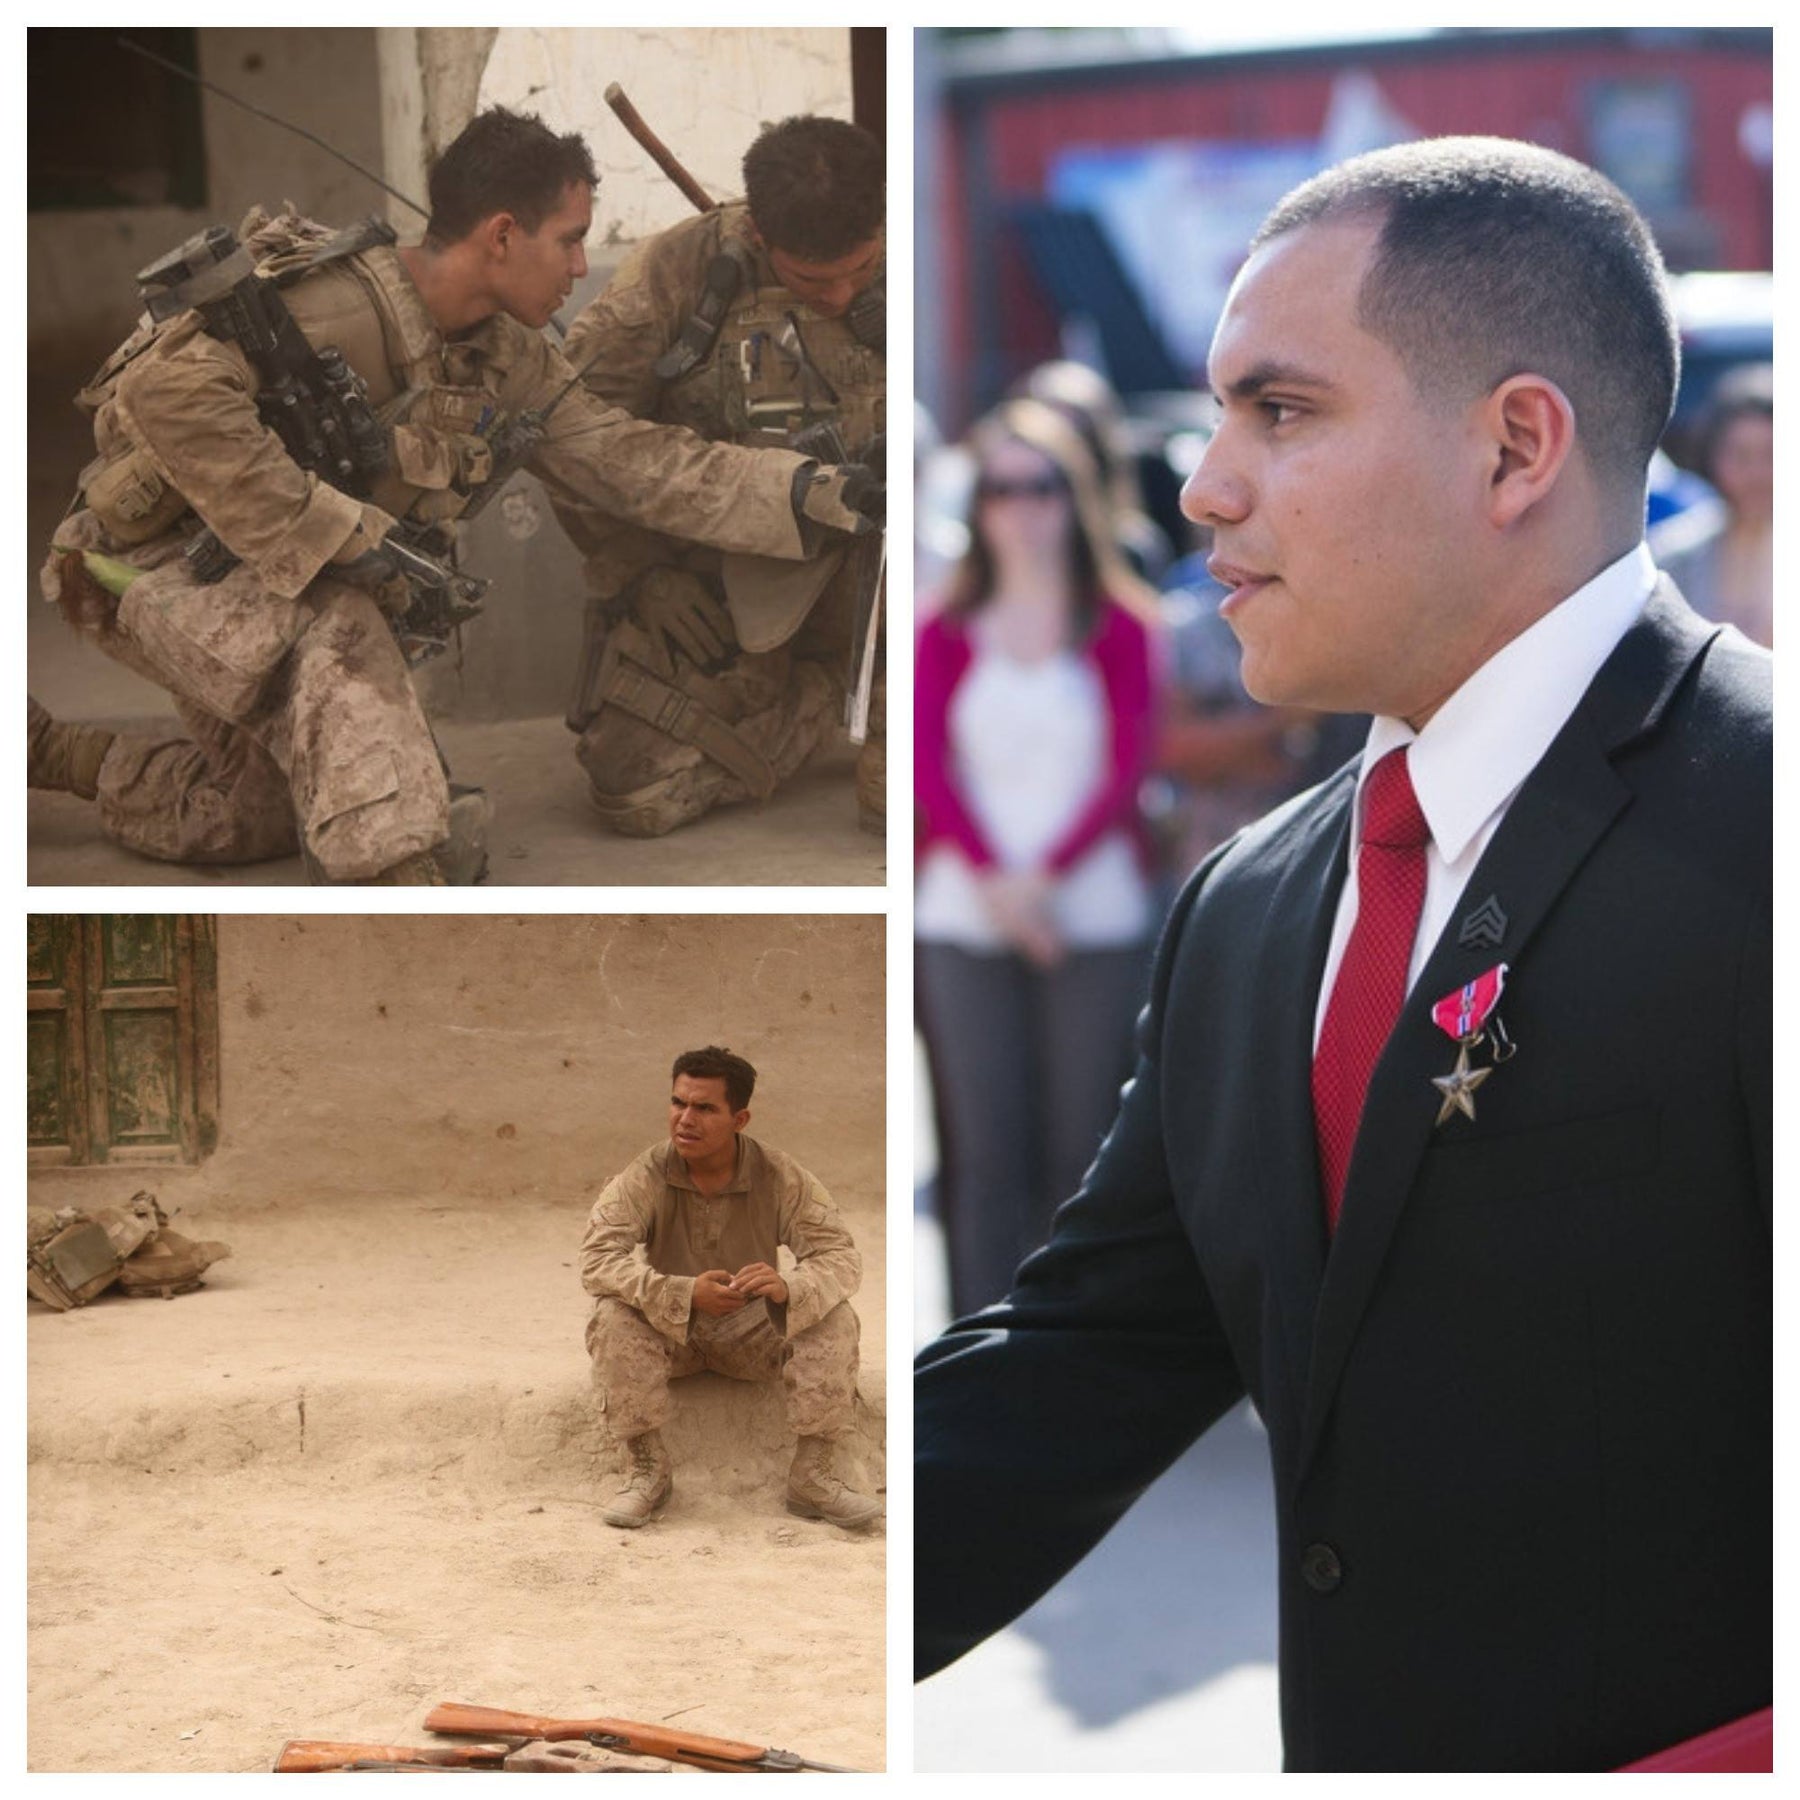 #Marine of the Week // "We got shot at every 500 meters after that. We pushed through"